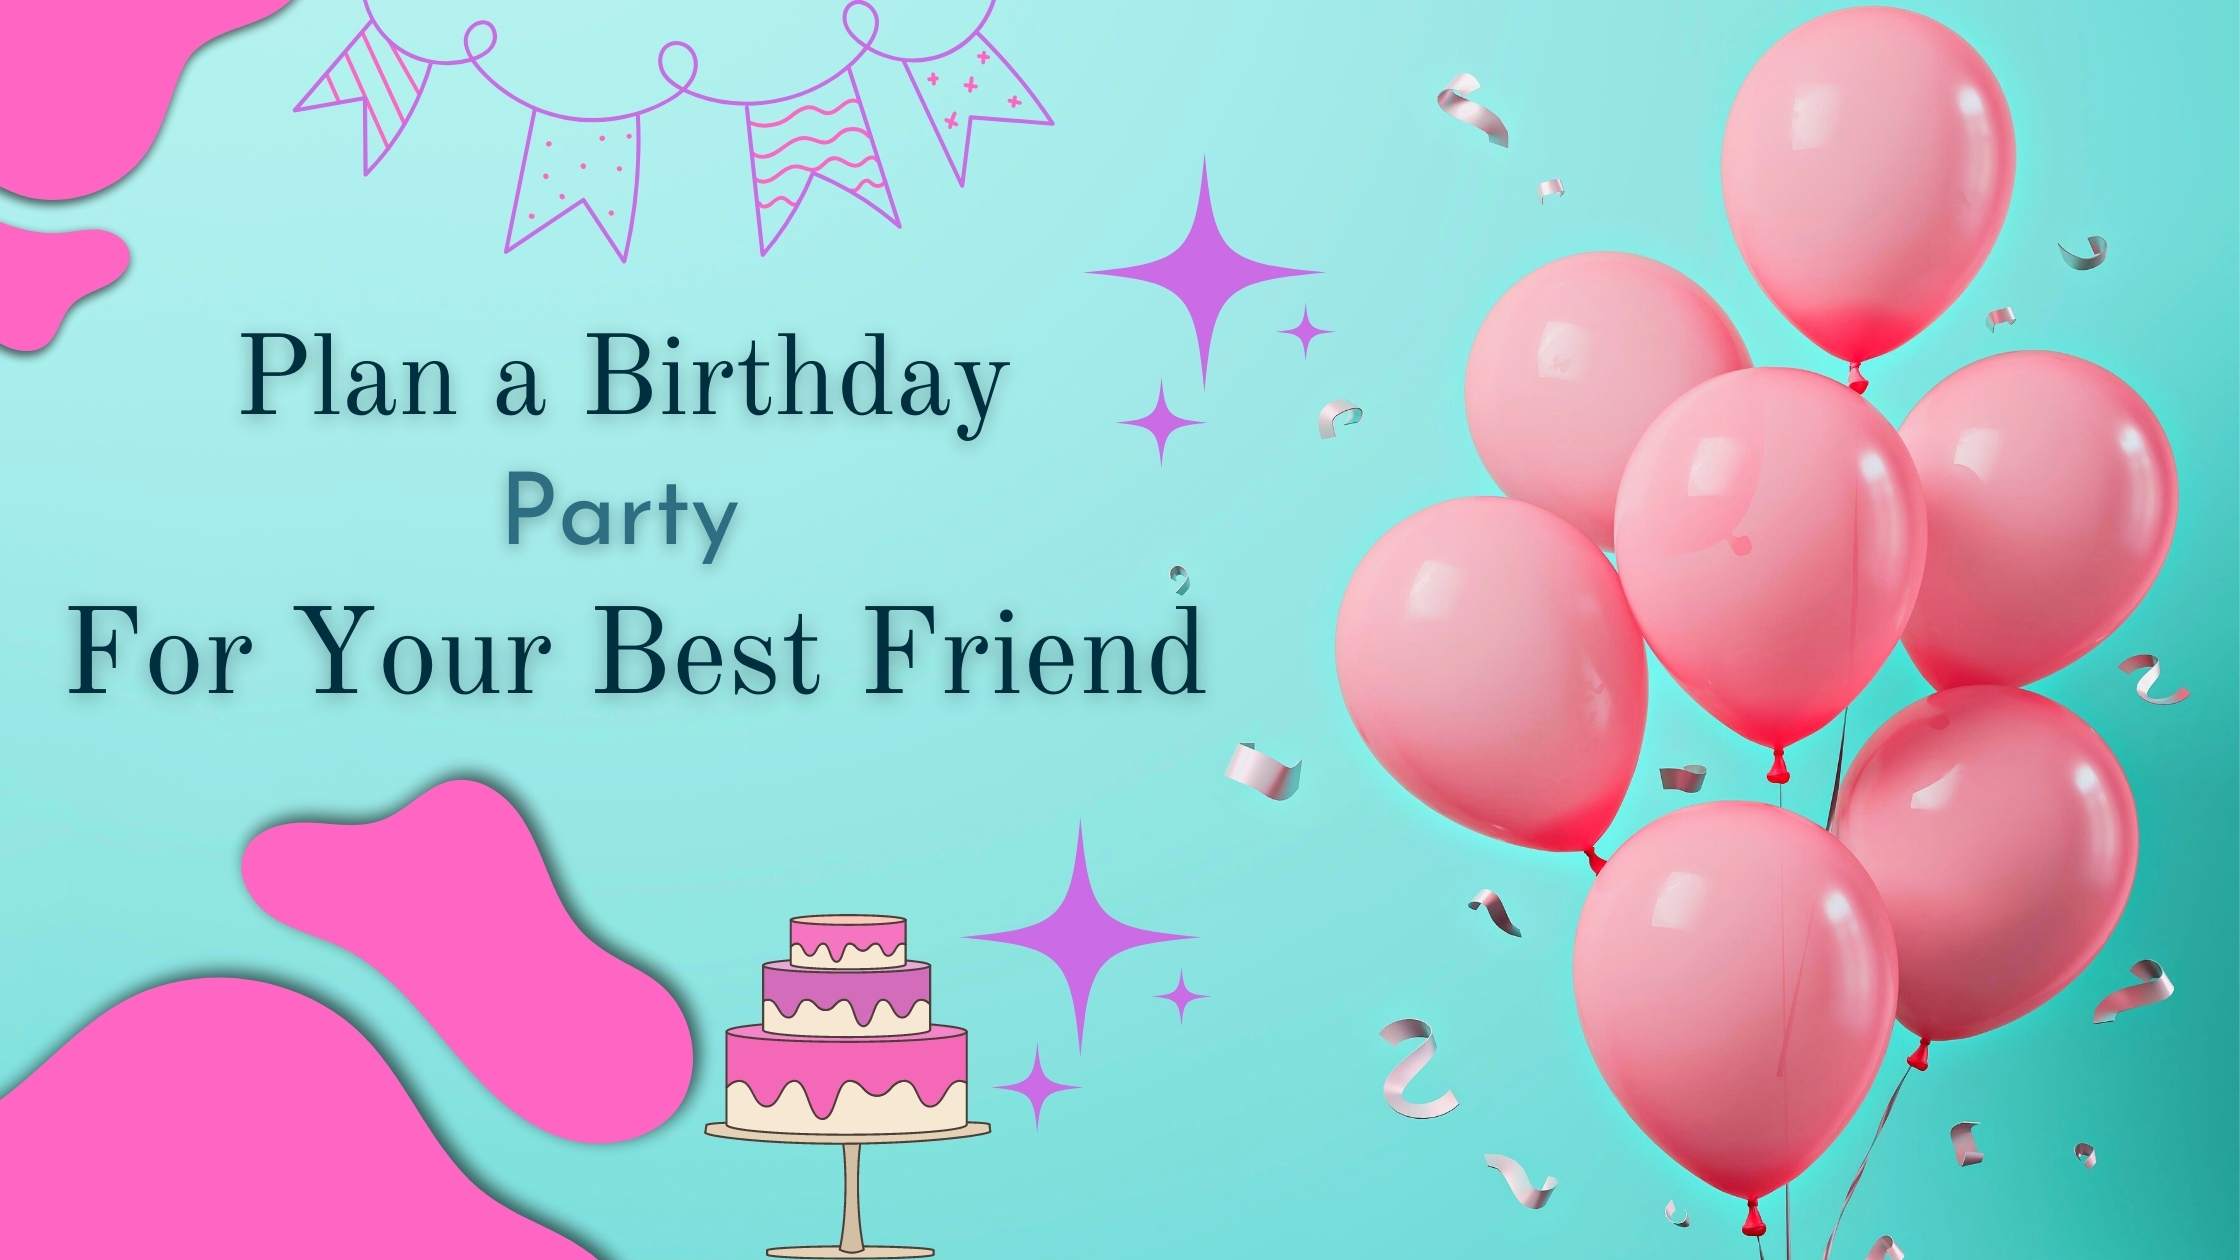 7 Amazing Gifts Ideas To Plan A Wonderful Birthday Party For Your Best Friend